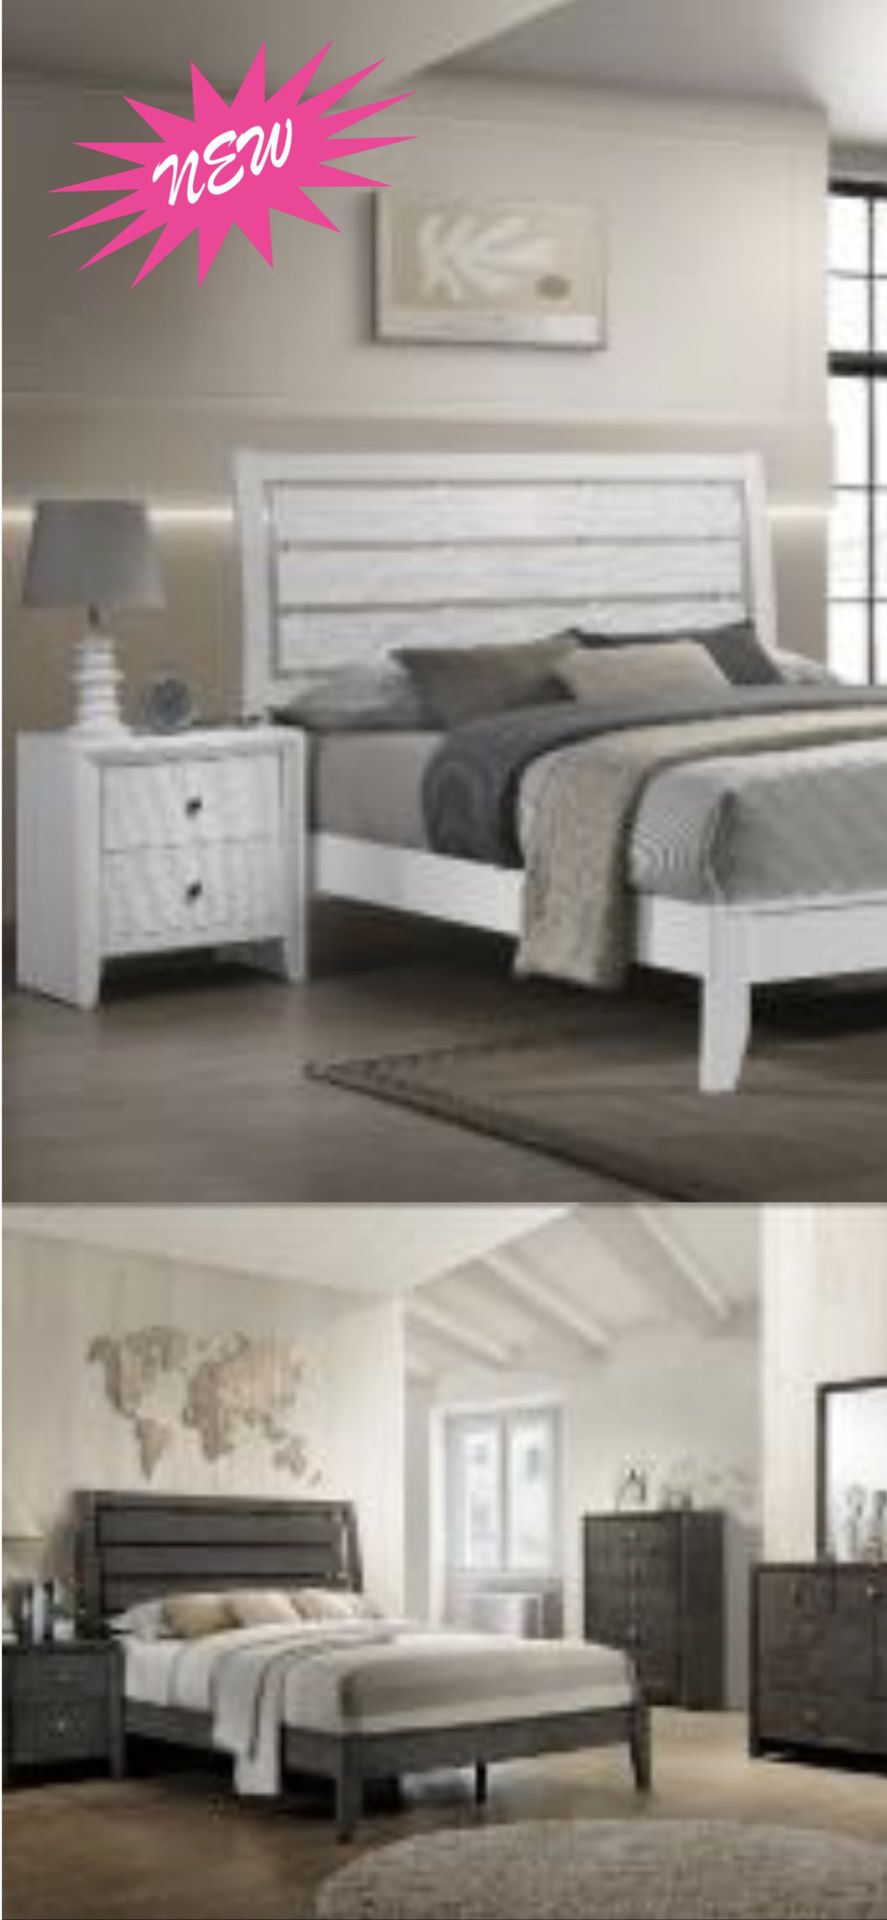 omQueCQueen size or full-size our twi size headboard, footboard rails, dresser, mirror, chest and nightstand. All seven pieces for only $999 brand new